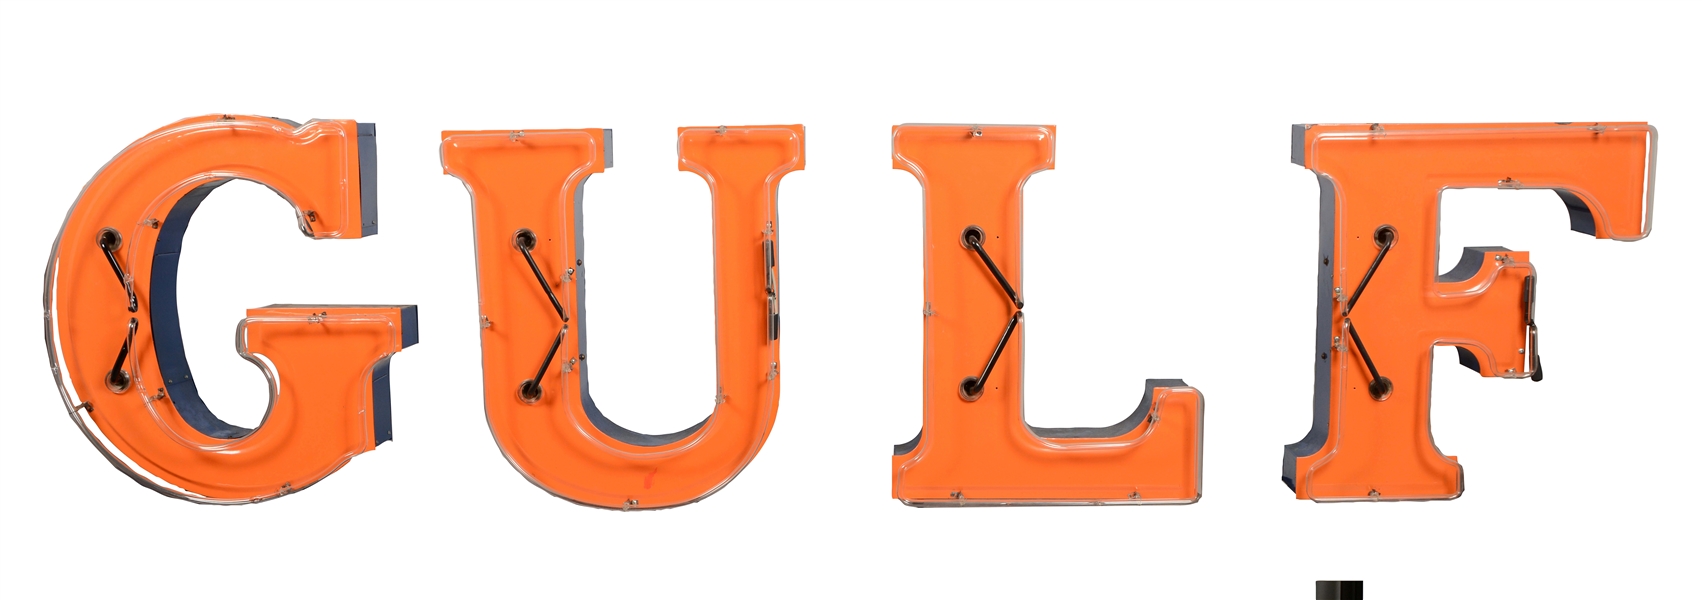 LARGE GULF PORCELAIN NEON LETTERS.